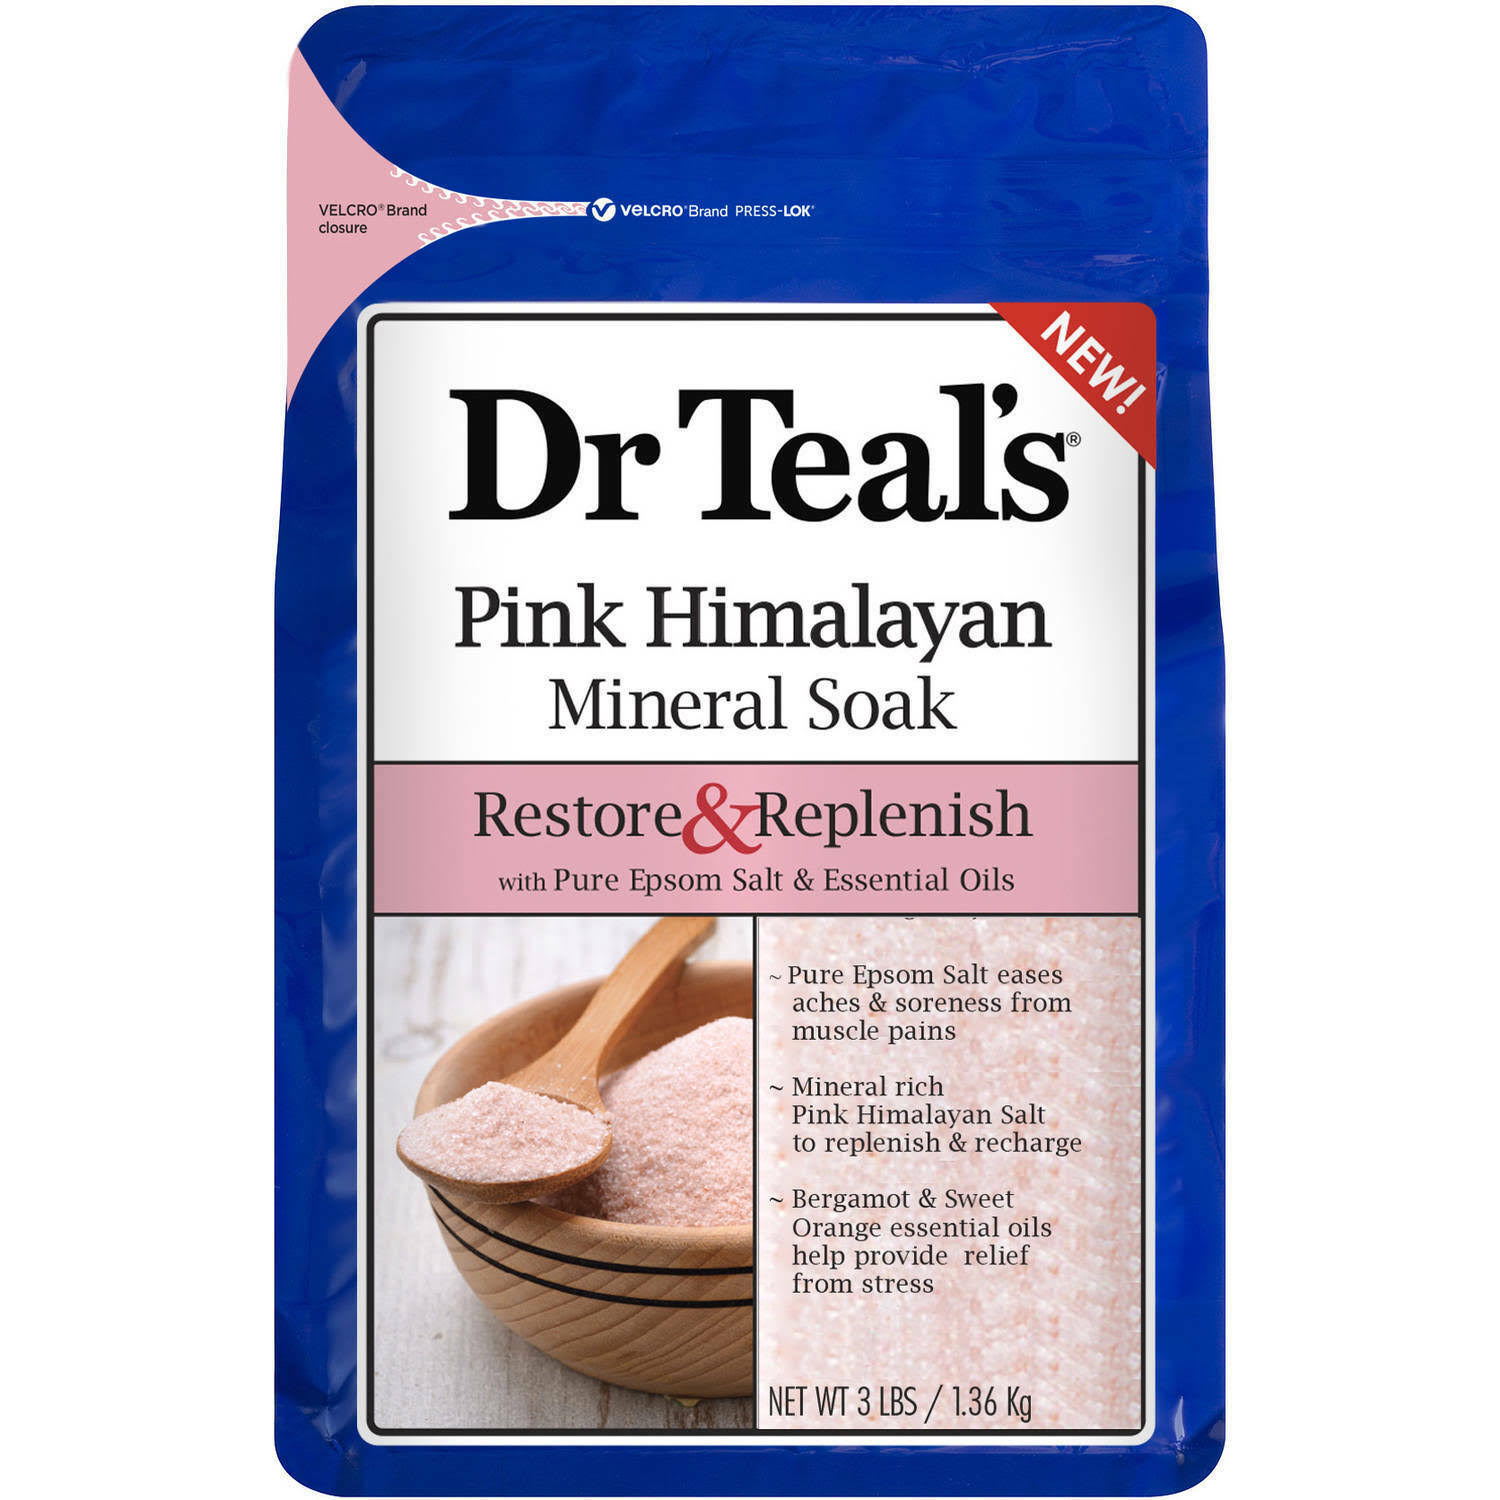 Dr Teal's Restore and Replenish Pink Himalayan Mineral Soak - 3lbs